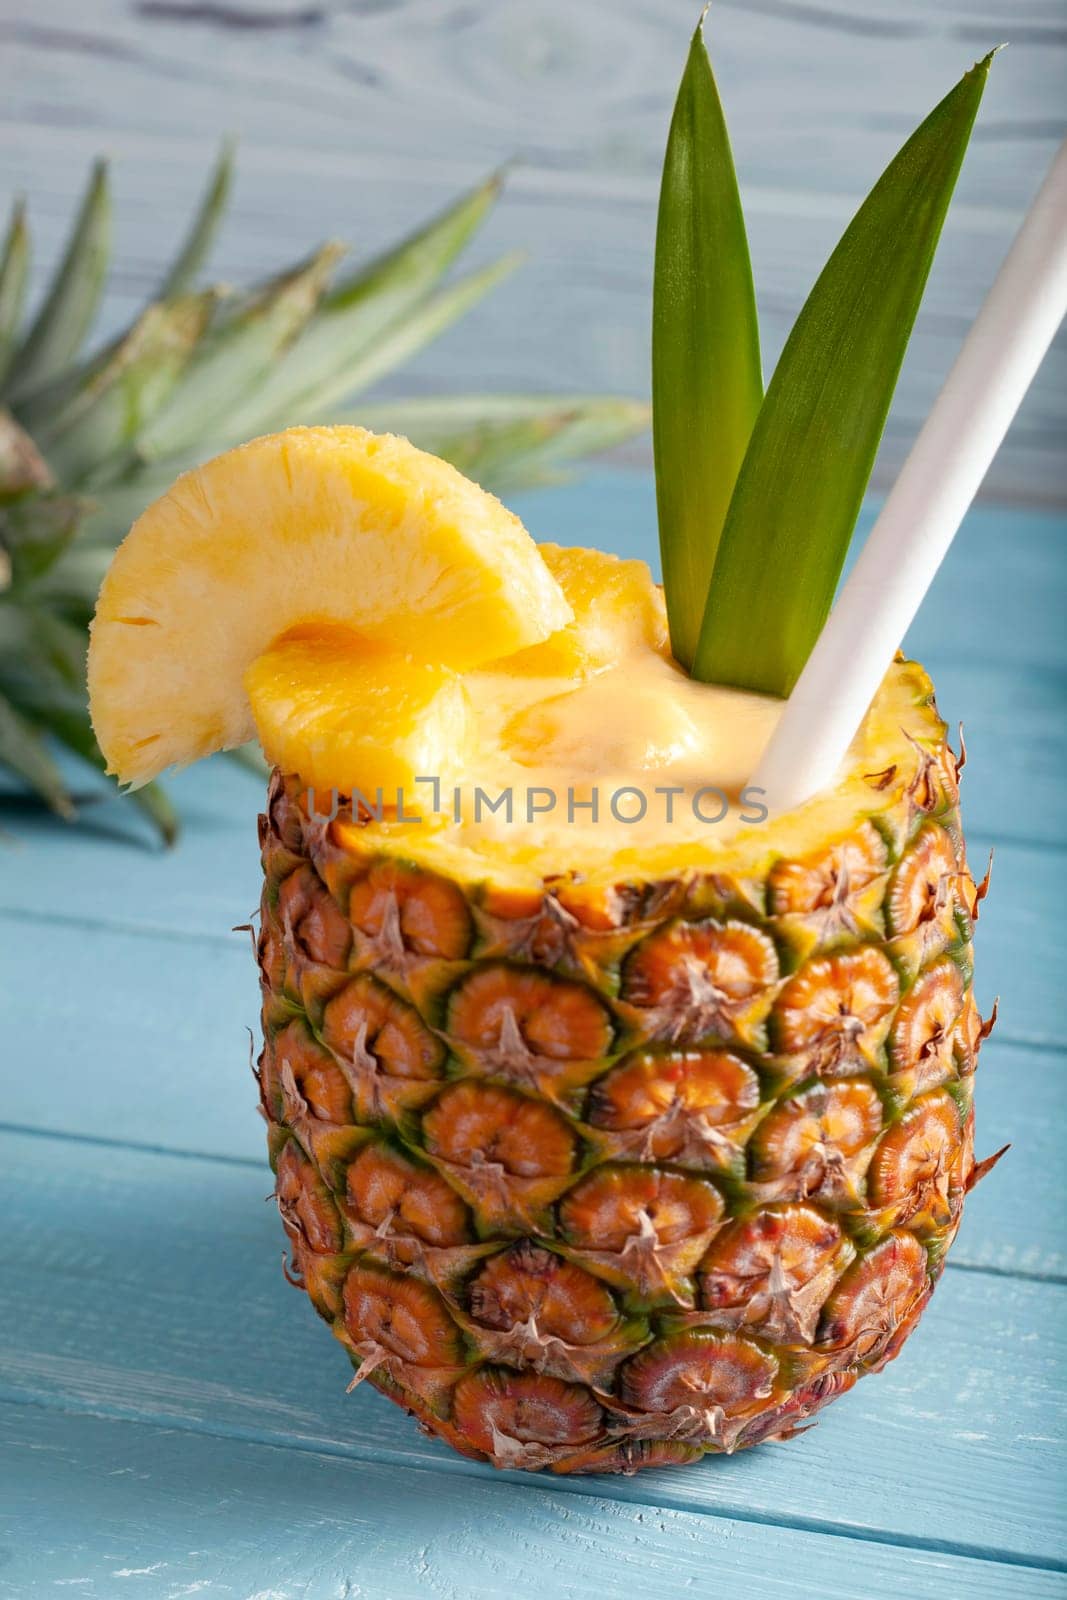 A vertical photo of a pina colada cocktail on a blue wooden background with pineapple pieces, a white straw, two green leaves, and a sliced pineapple crown lying in the blurred background